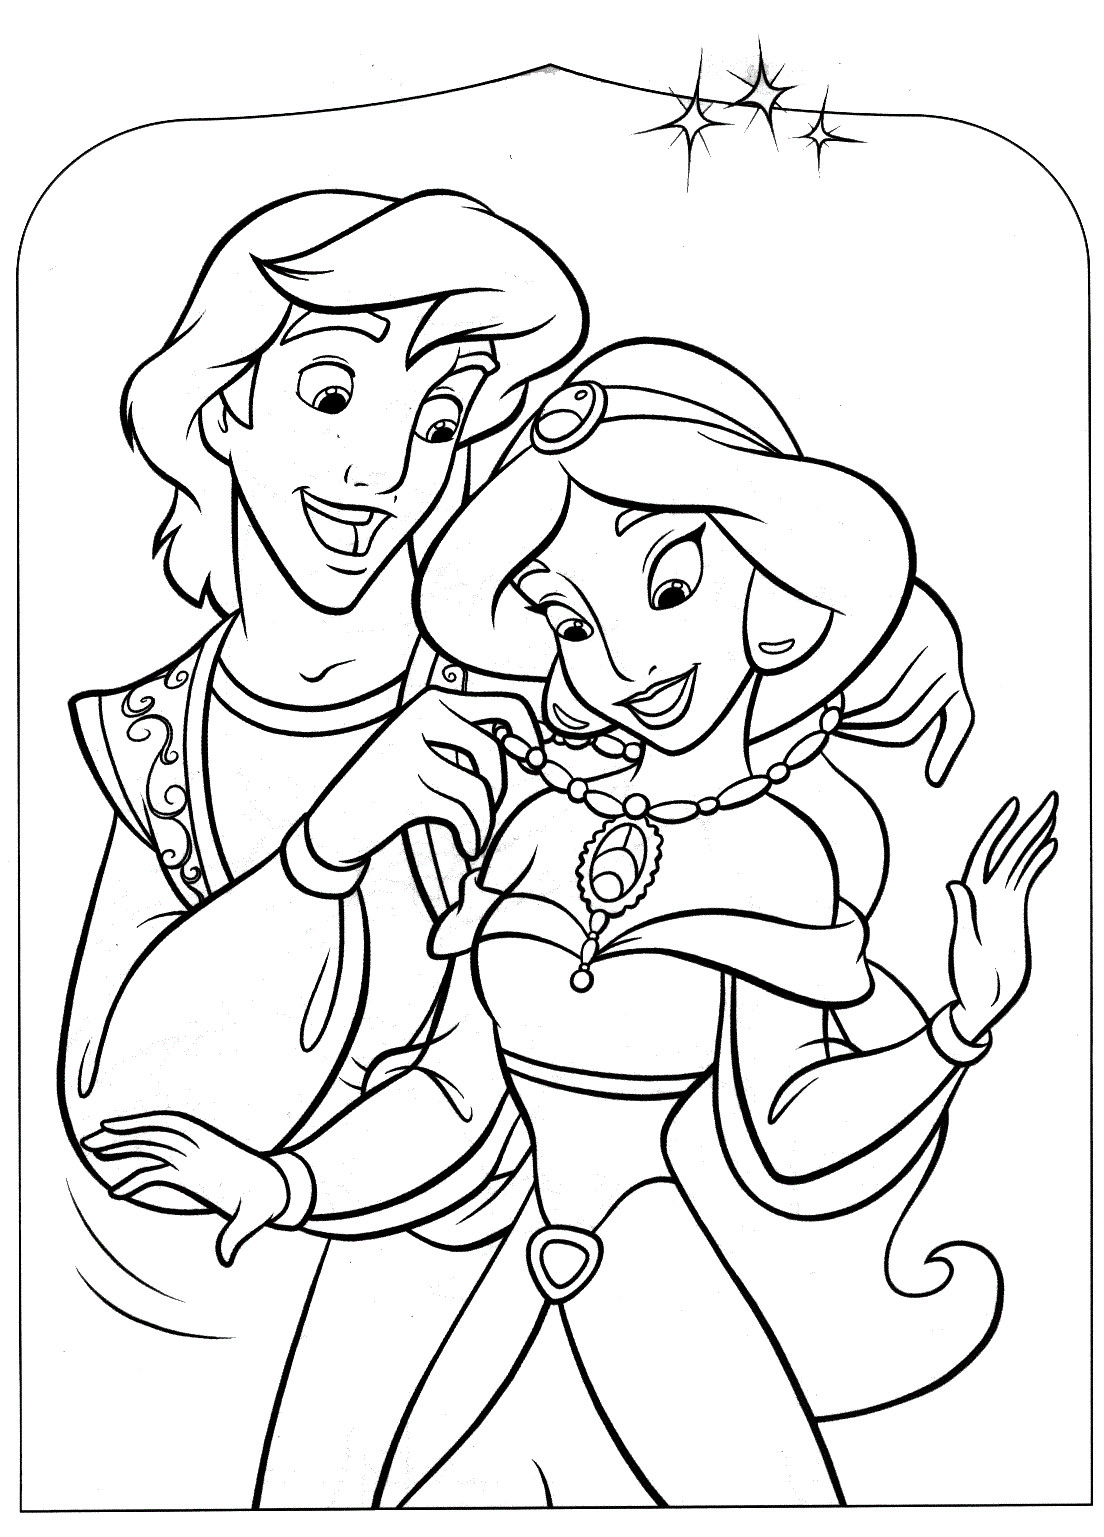 Free Printable Coloring Sheets For Toddlers
 Free Printable Aladdin Coloring Pages For Kids